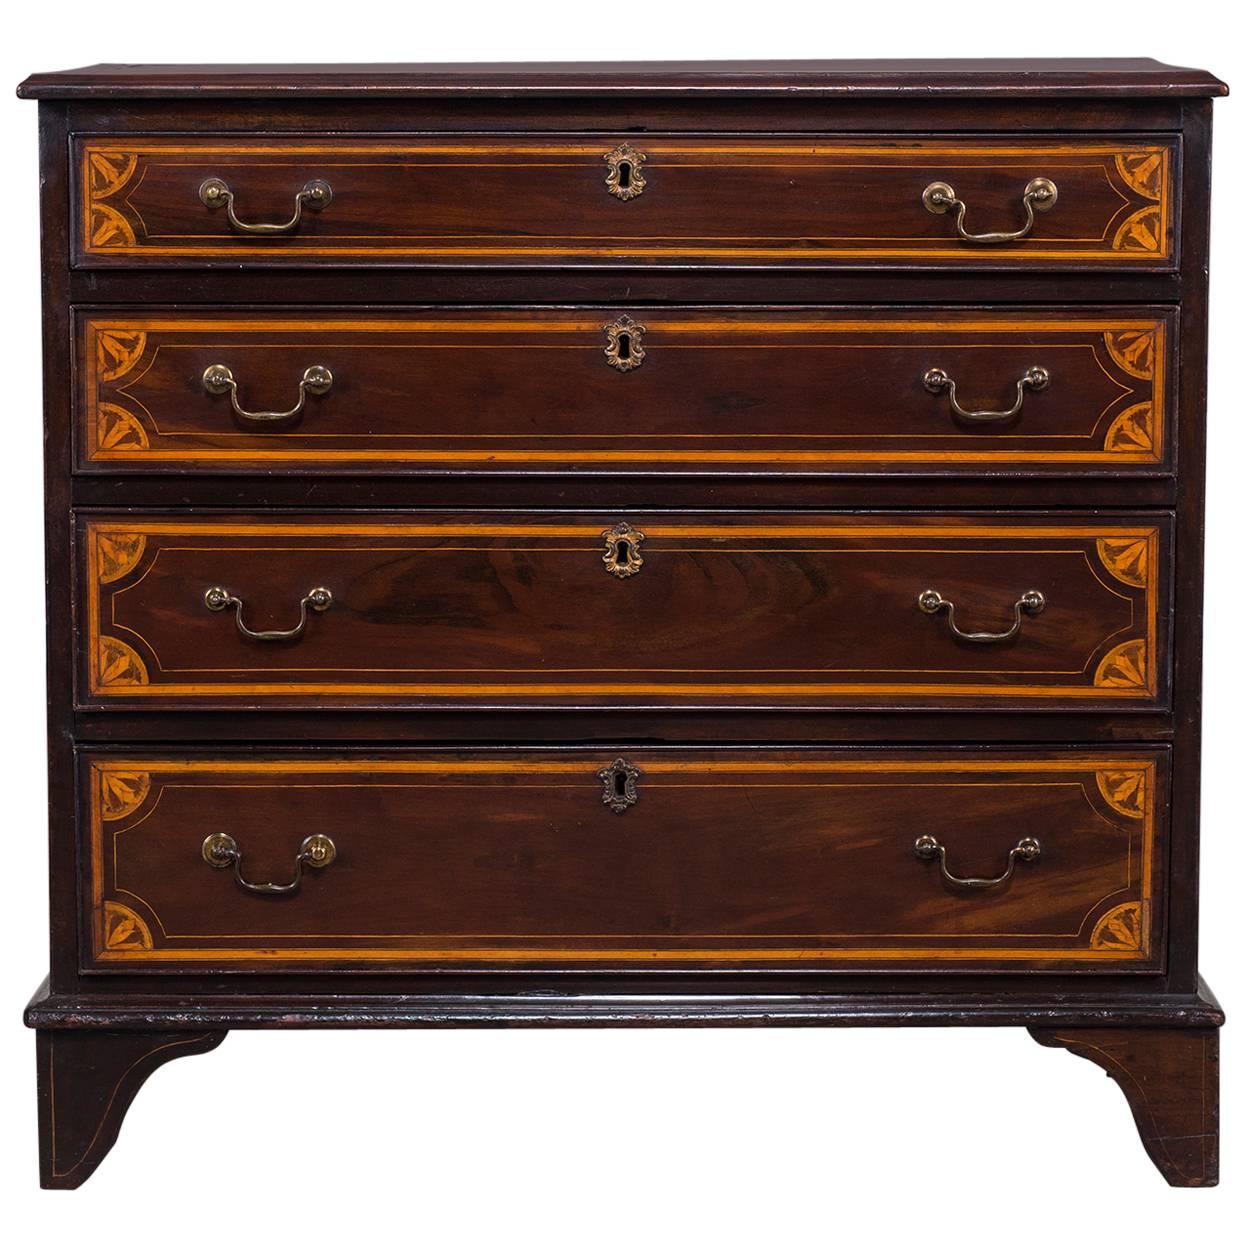 Antique English Neoclassical Mahogany Chest of Drawers, circa 1860